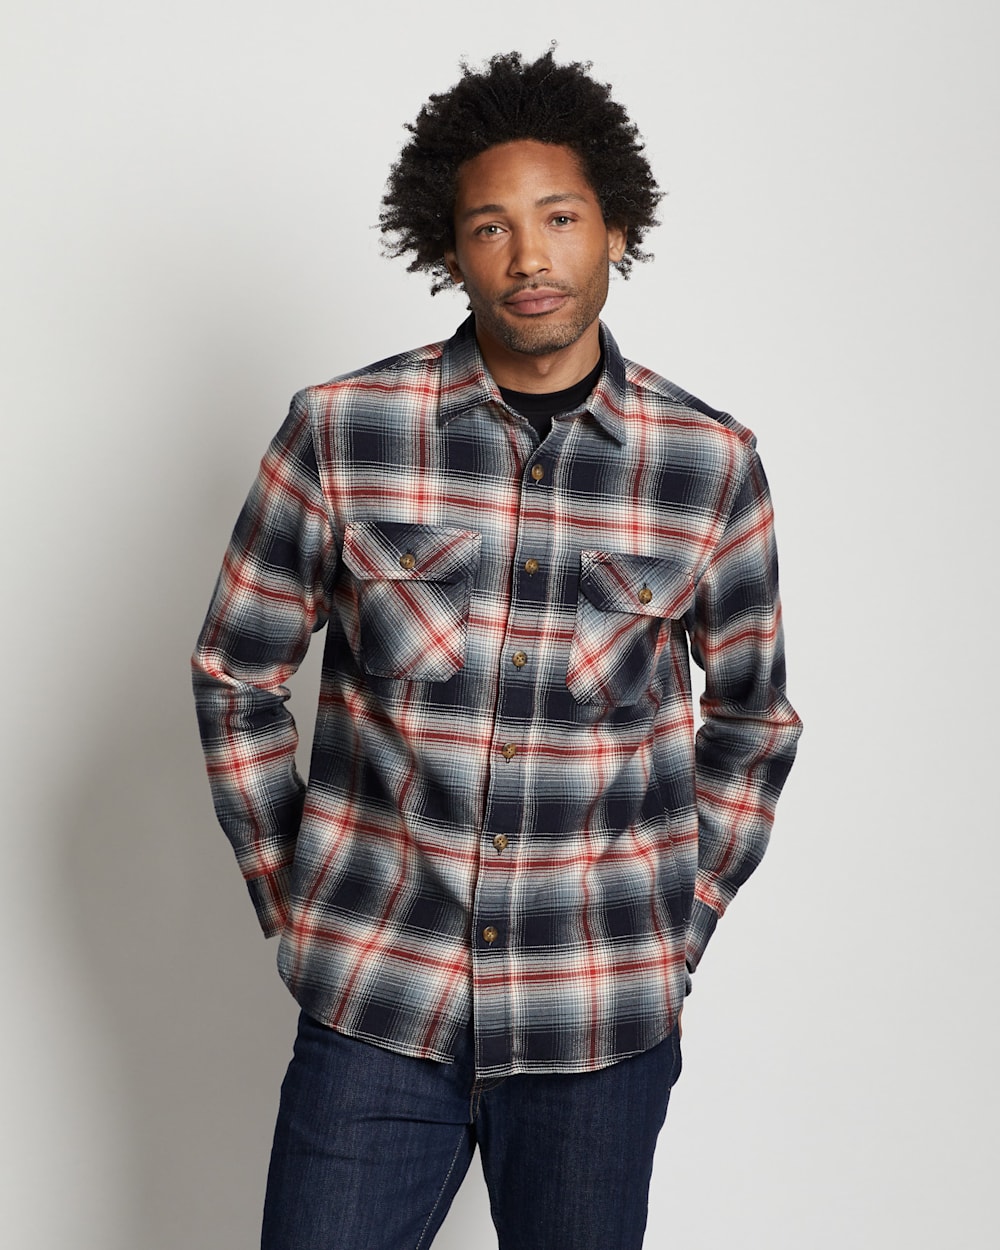 ALTERNATE VIEW OF MEN'S PLAID BURNSIDE DOUBLE-BRUSHED FLANNEL SHIRT IN NAVY/IVORY/RED PLAID image number 3